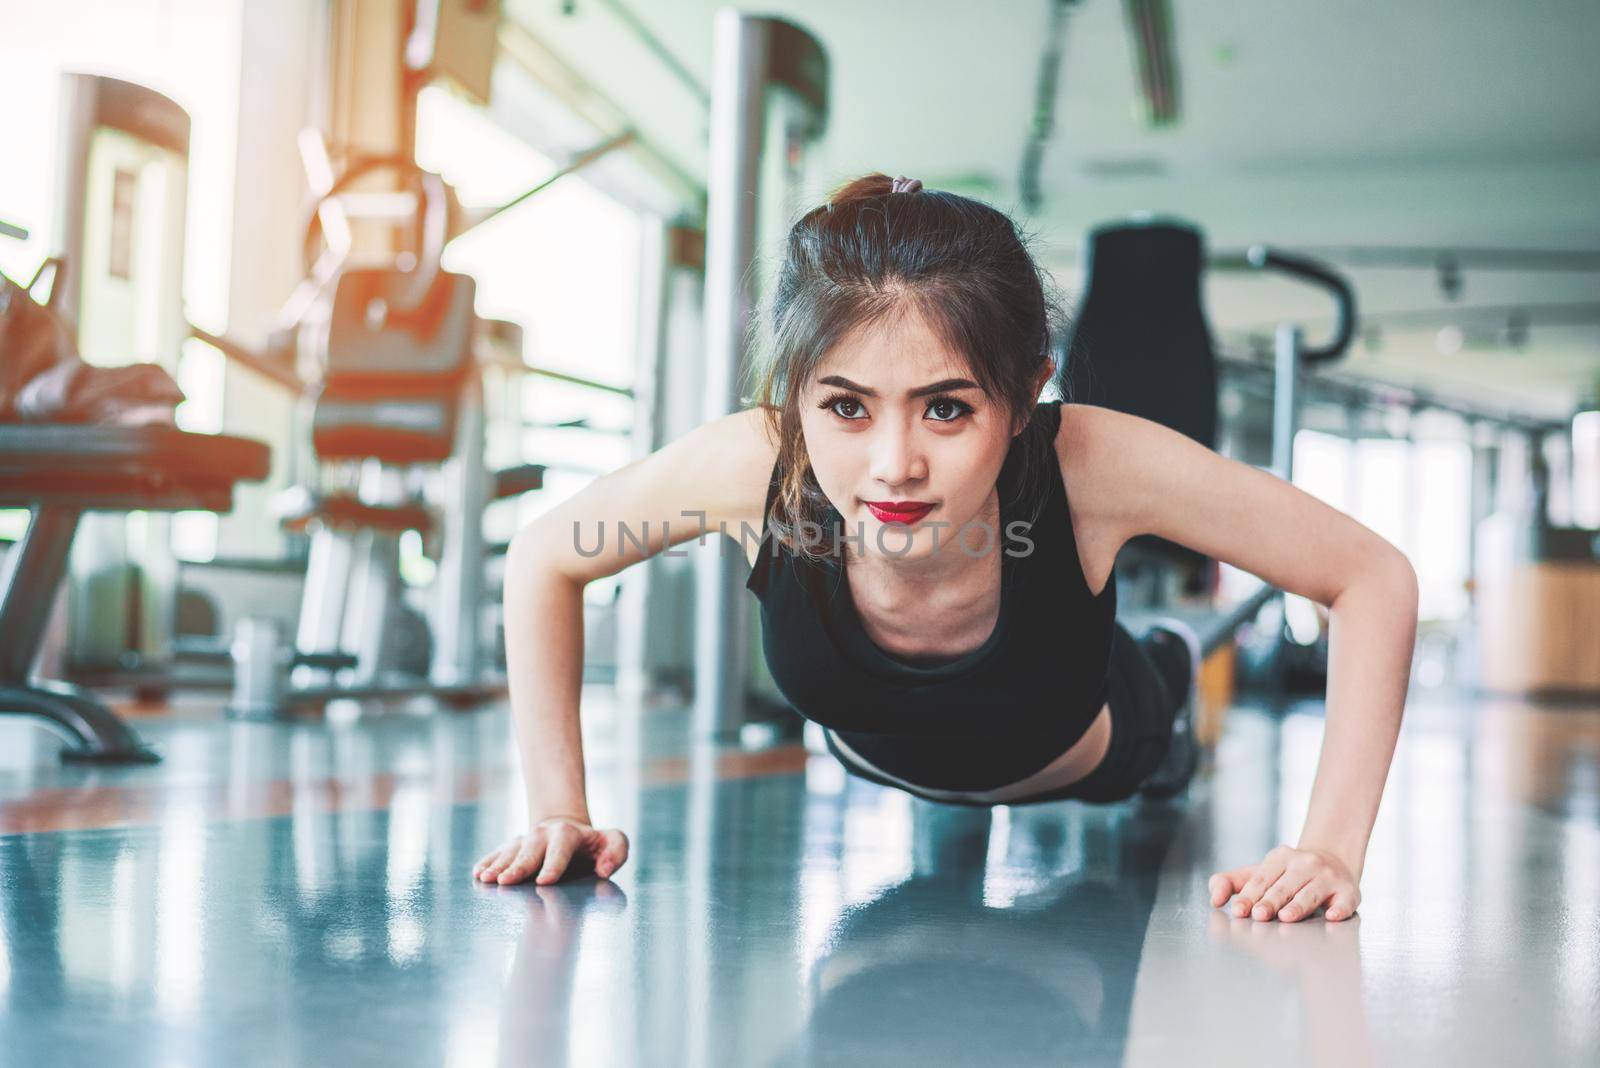 Asian woman fitness girl do pushing ups at fitness gym. Healthcare and Healthy concept. Training and Body build up theme. Strength and Beauty concept